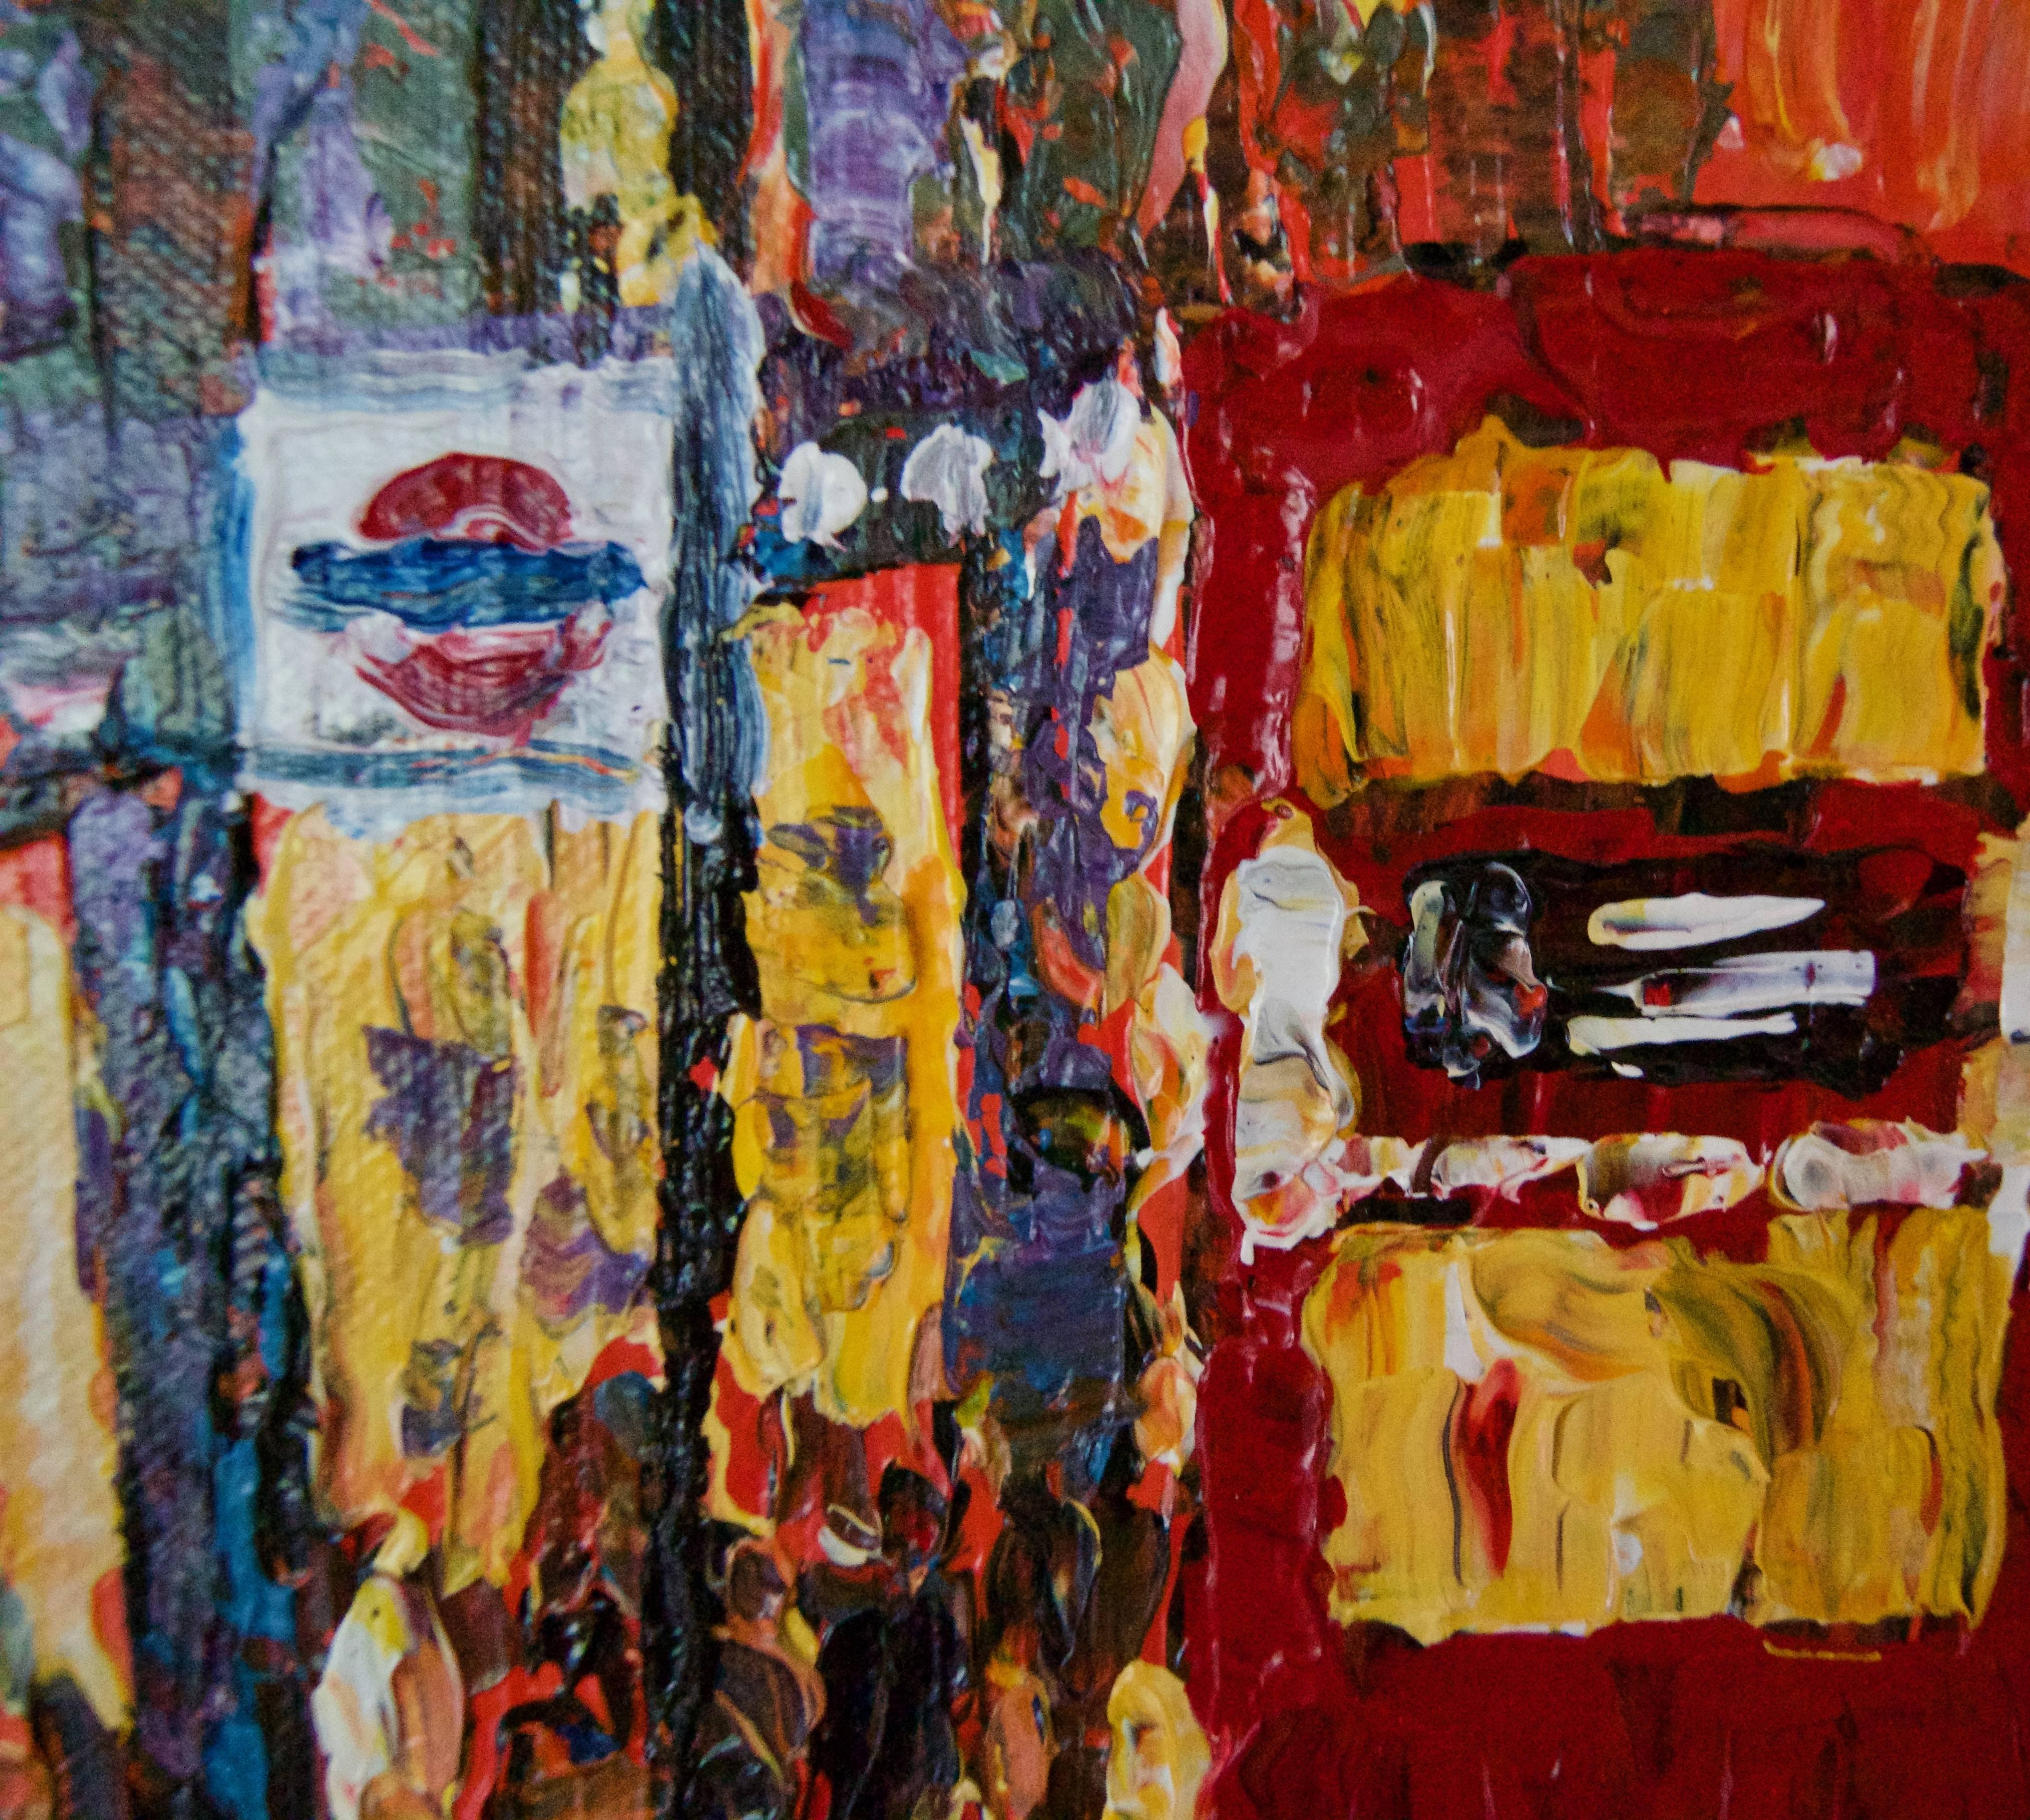 London High Street - Late 20th Century Impressionist Acrylic of Bus Stop Quirke - Post-Impressionist Painting by Michael Quirke